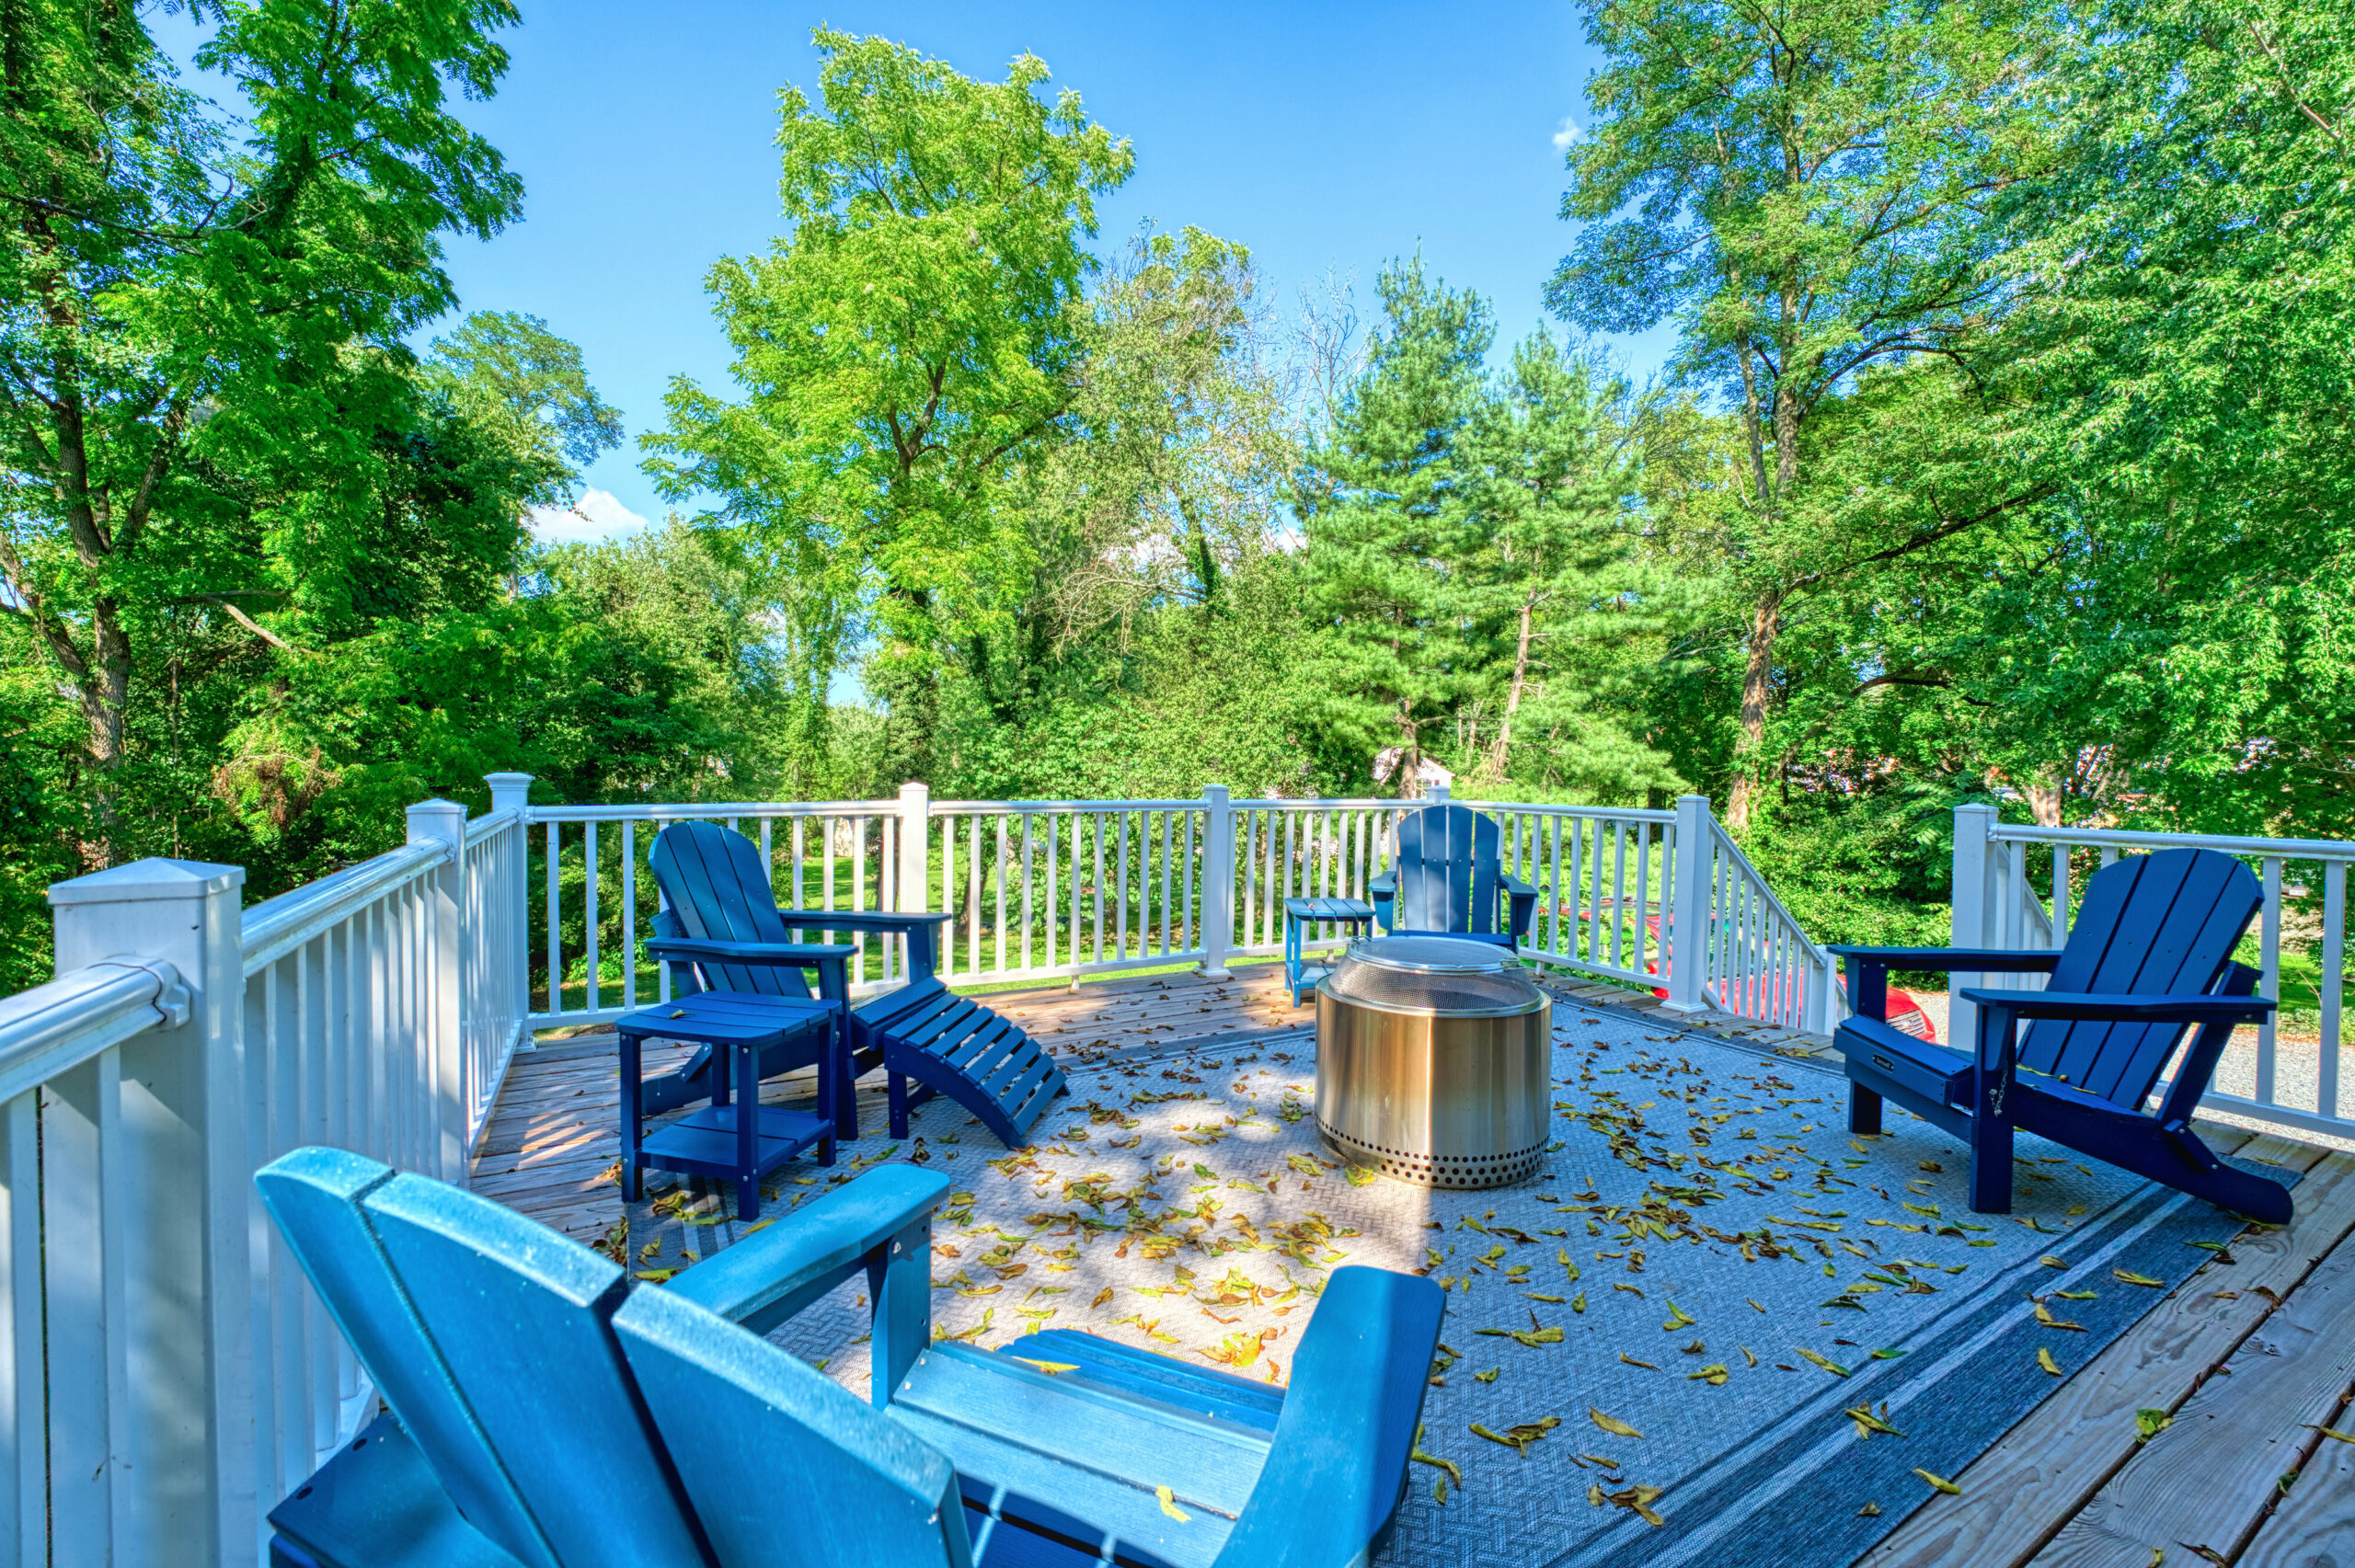 large back deck off historic home in Hamilton, VA on a bright sunny day with lush trees surrounding the background. Adirondack chairs centered around a portable fire pit.